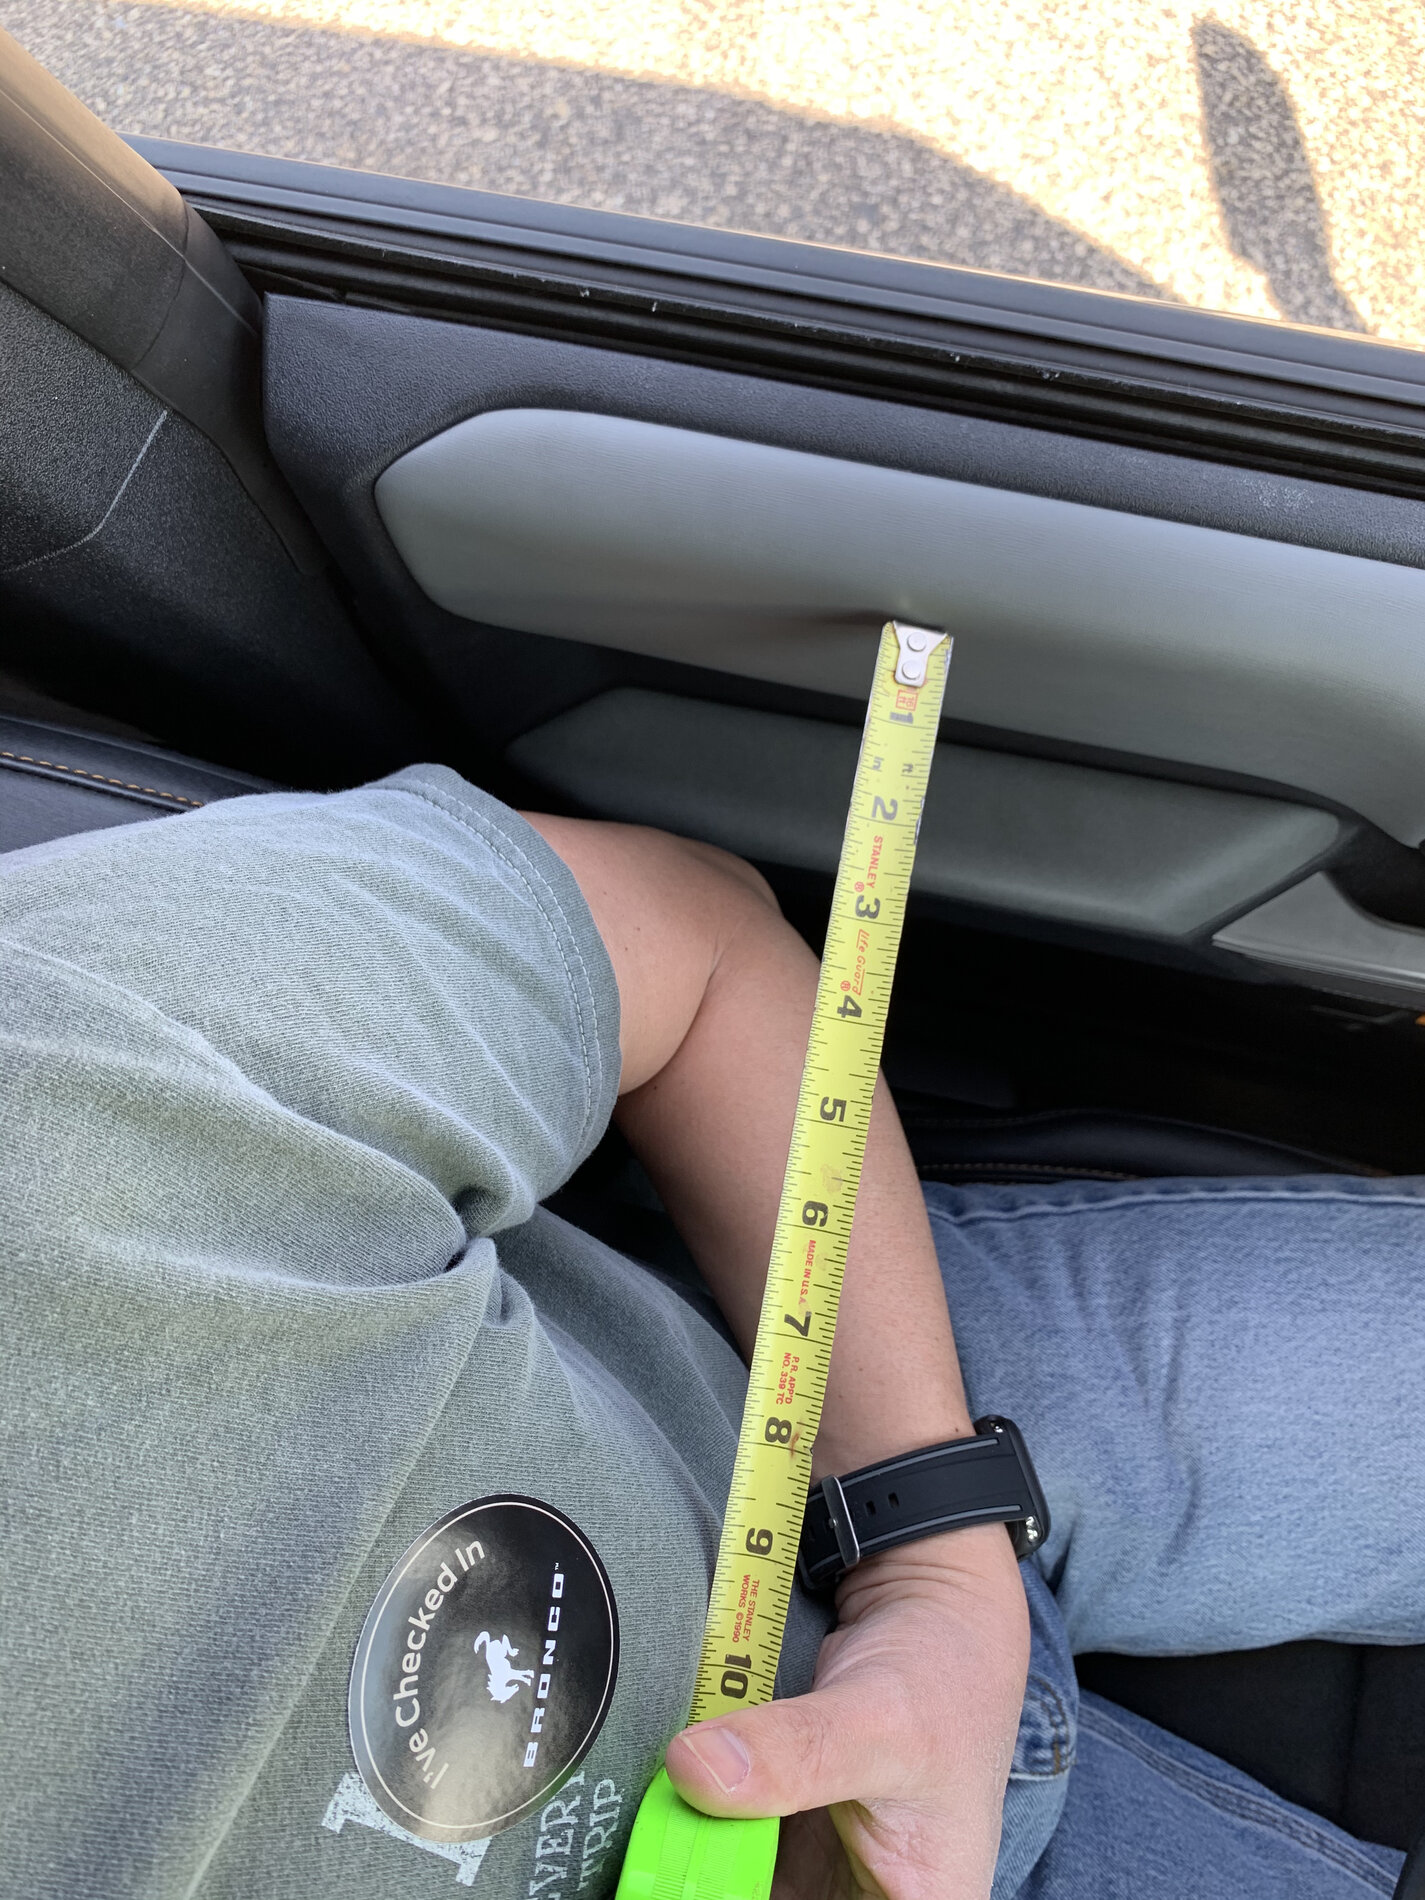 Ford Bronco Visibility / rear view mirror measurements + lots of other pics/observations EF556BAB-A72A-4556-B4E6-4C9F1D7200C8